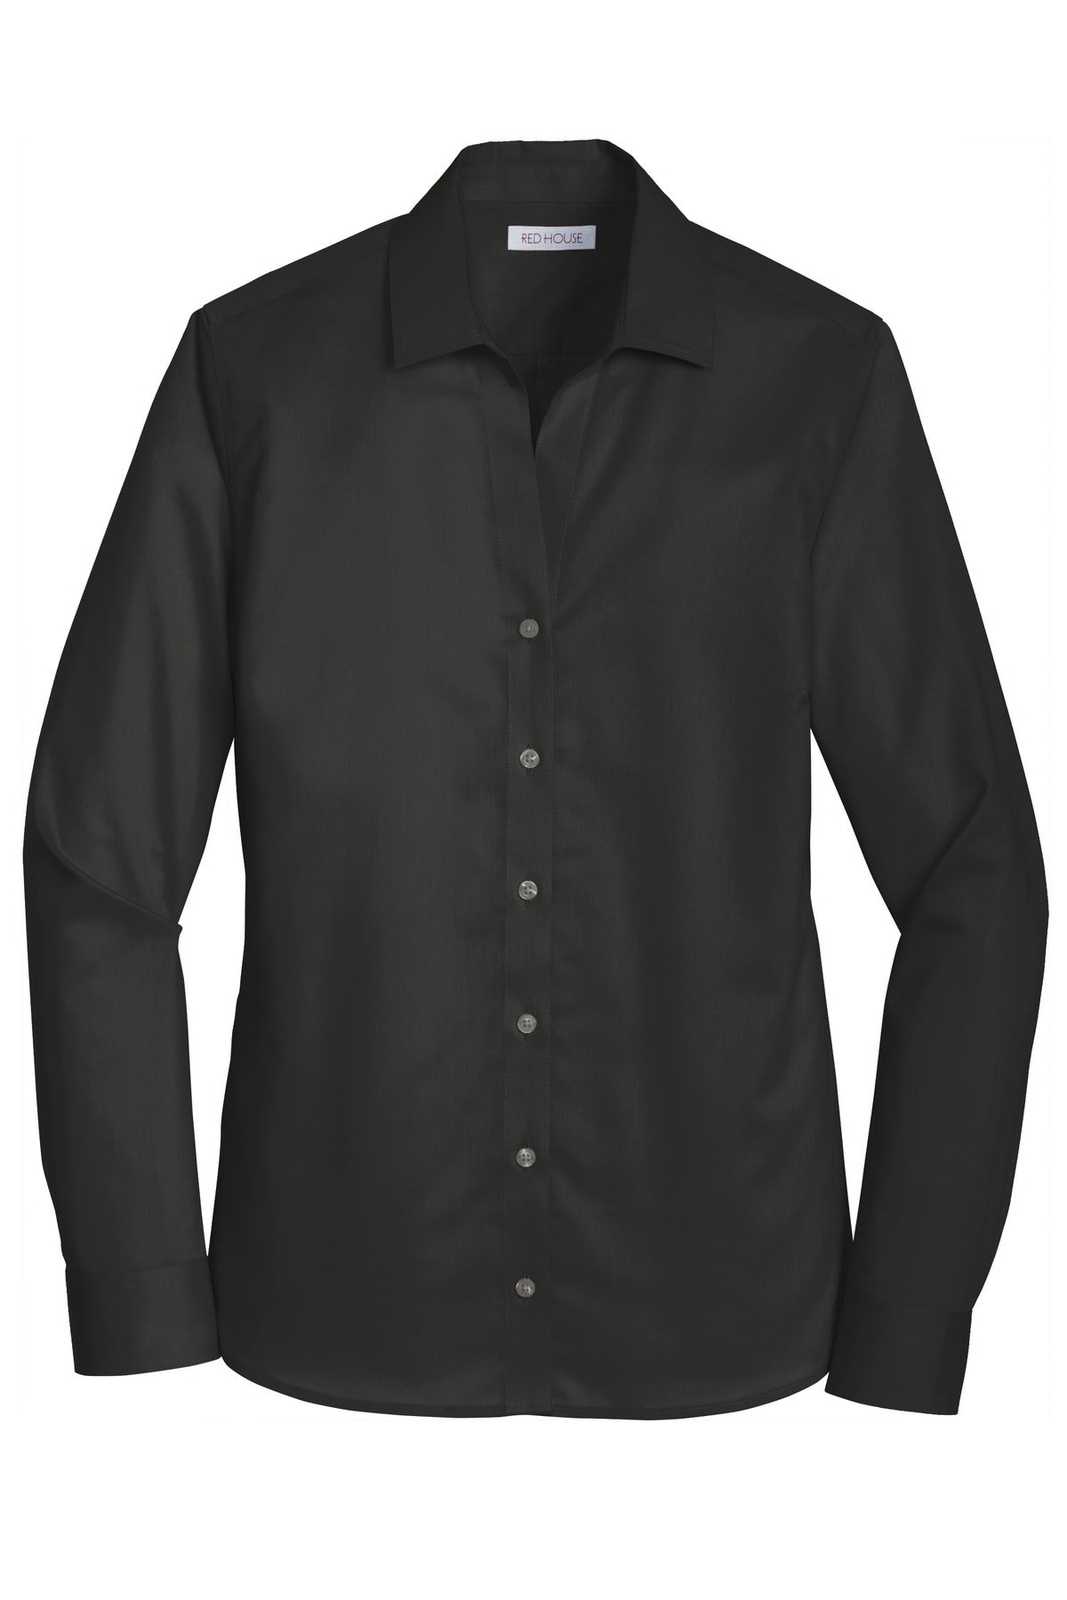 Red House RH79 Ladies Non-Iron Twill Shirt - Black - HIT a Double - 5